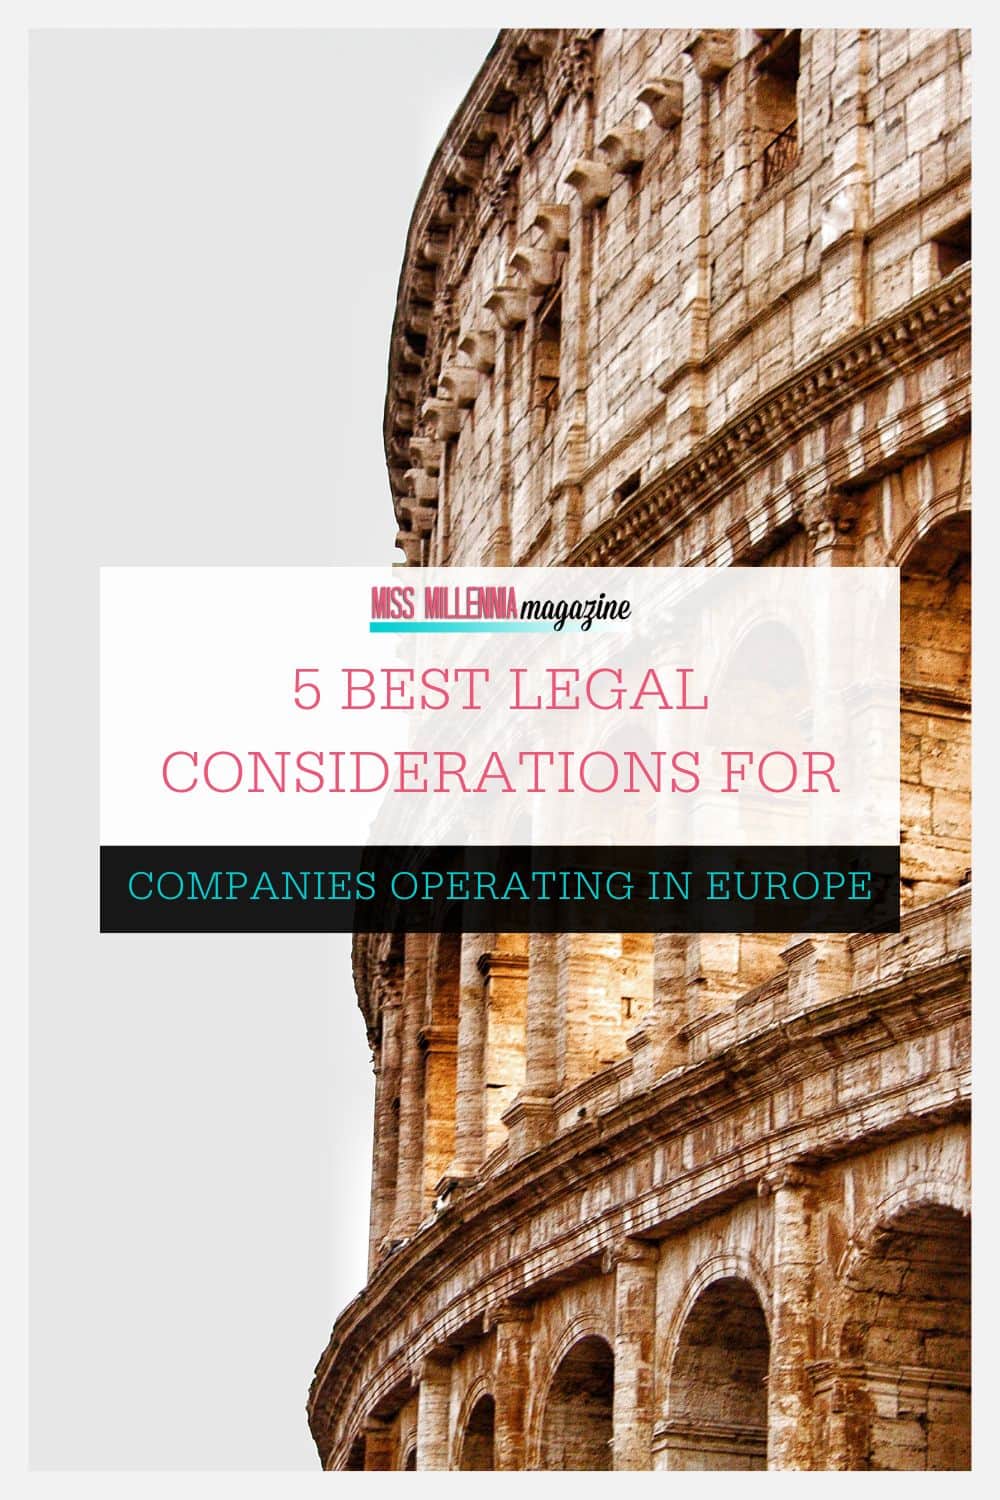 5 Best Legal Considerations for Companies Operating in Europe